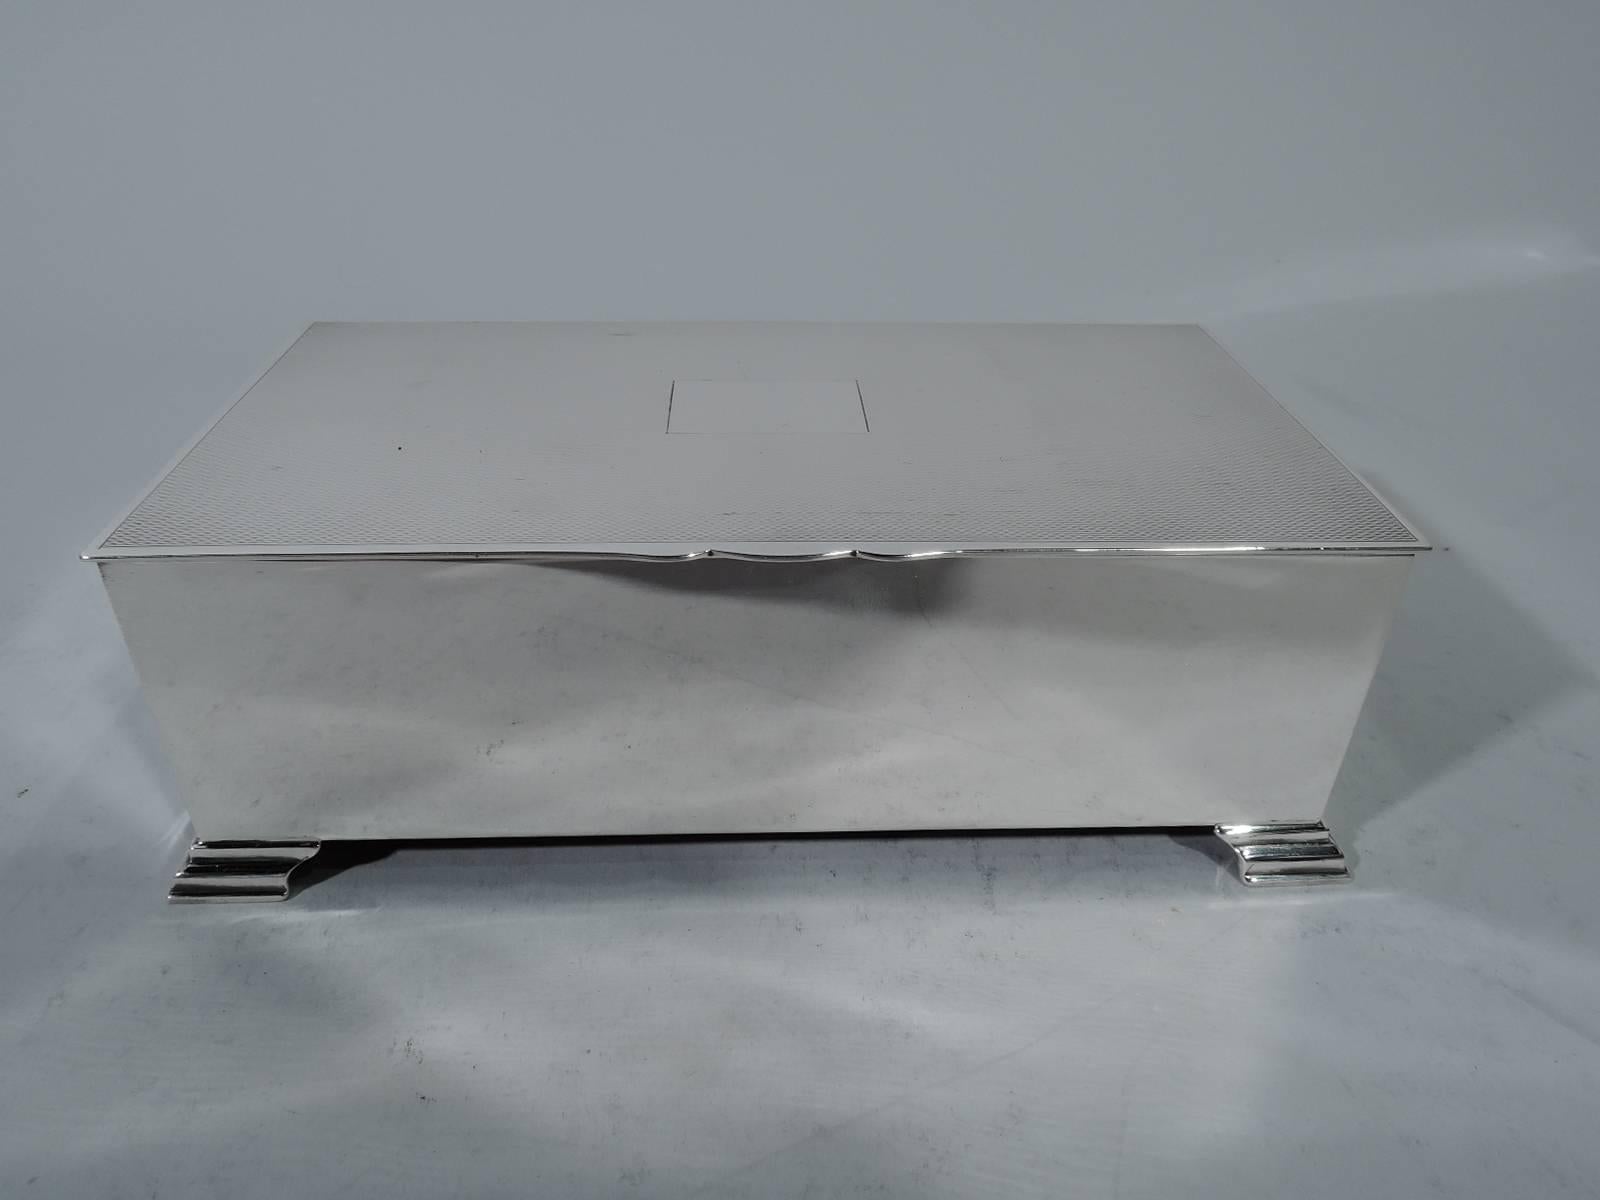 Art Deco sterling silver desk box. Made by John B. Chatterley & Sons in Birmingham in 1955. Rectangular with plain and straight sides. Cover flat and hinged with scalloped tab and central rectangular frame (vacant) surrounded by dense engine-turned